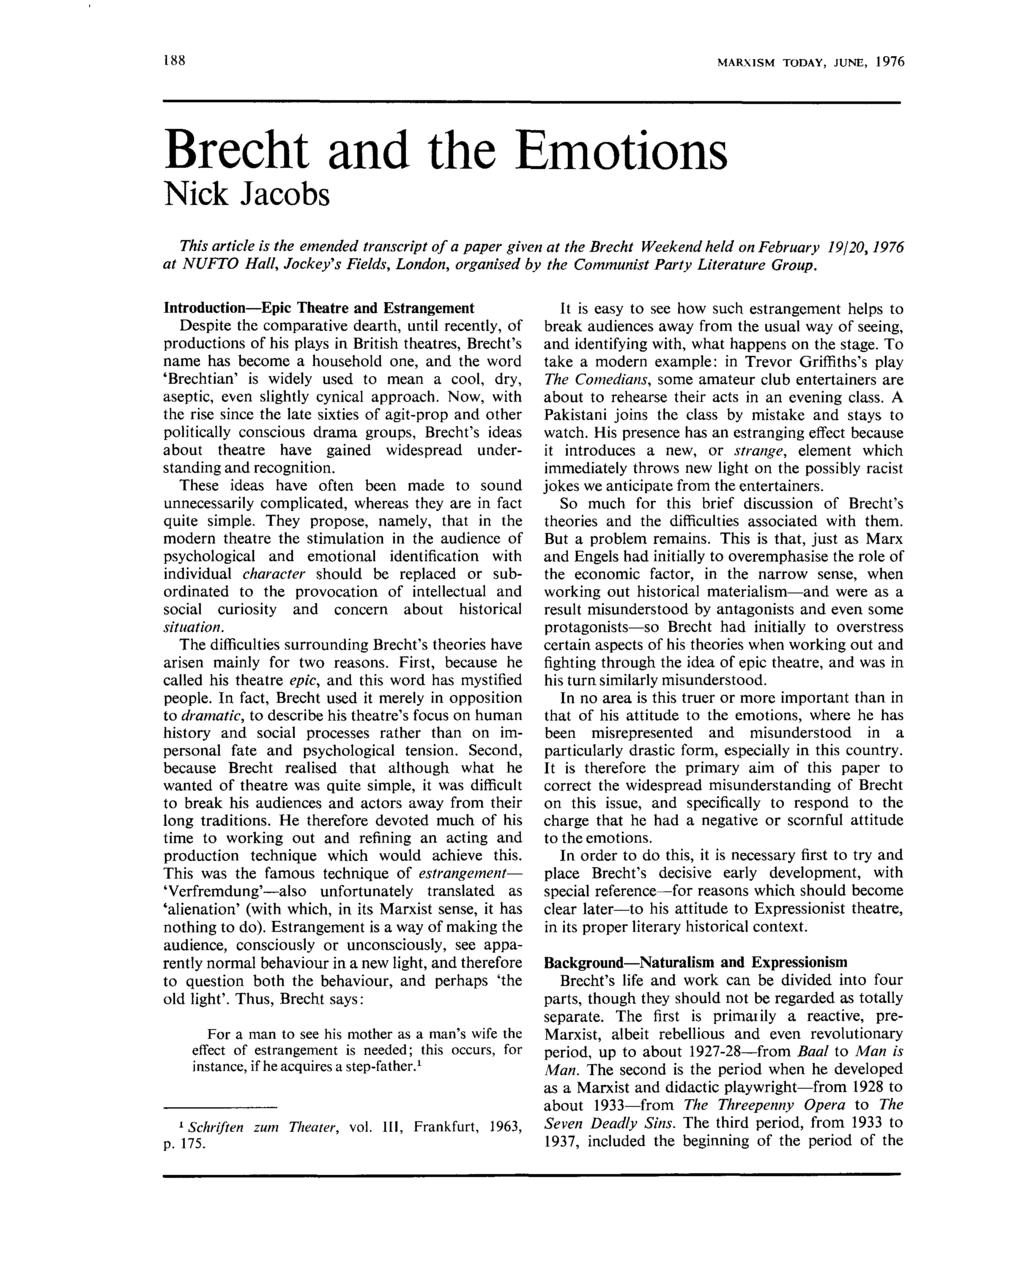 188 MARXISM TODAY, JUNE, 1976 Brecht and the Emotions Nick Jacobs This article is the emended transcript of a paper given at the Brecht Weekend held on February 19/20,1976 at NUFTO Hall, Jockey's